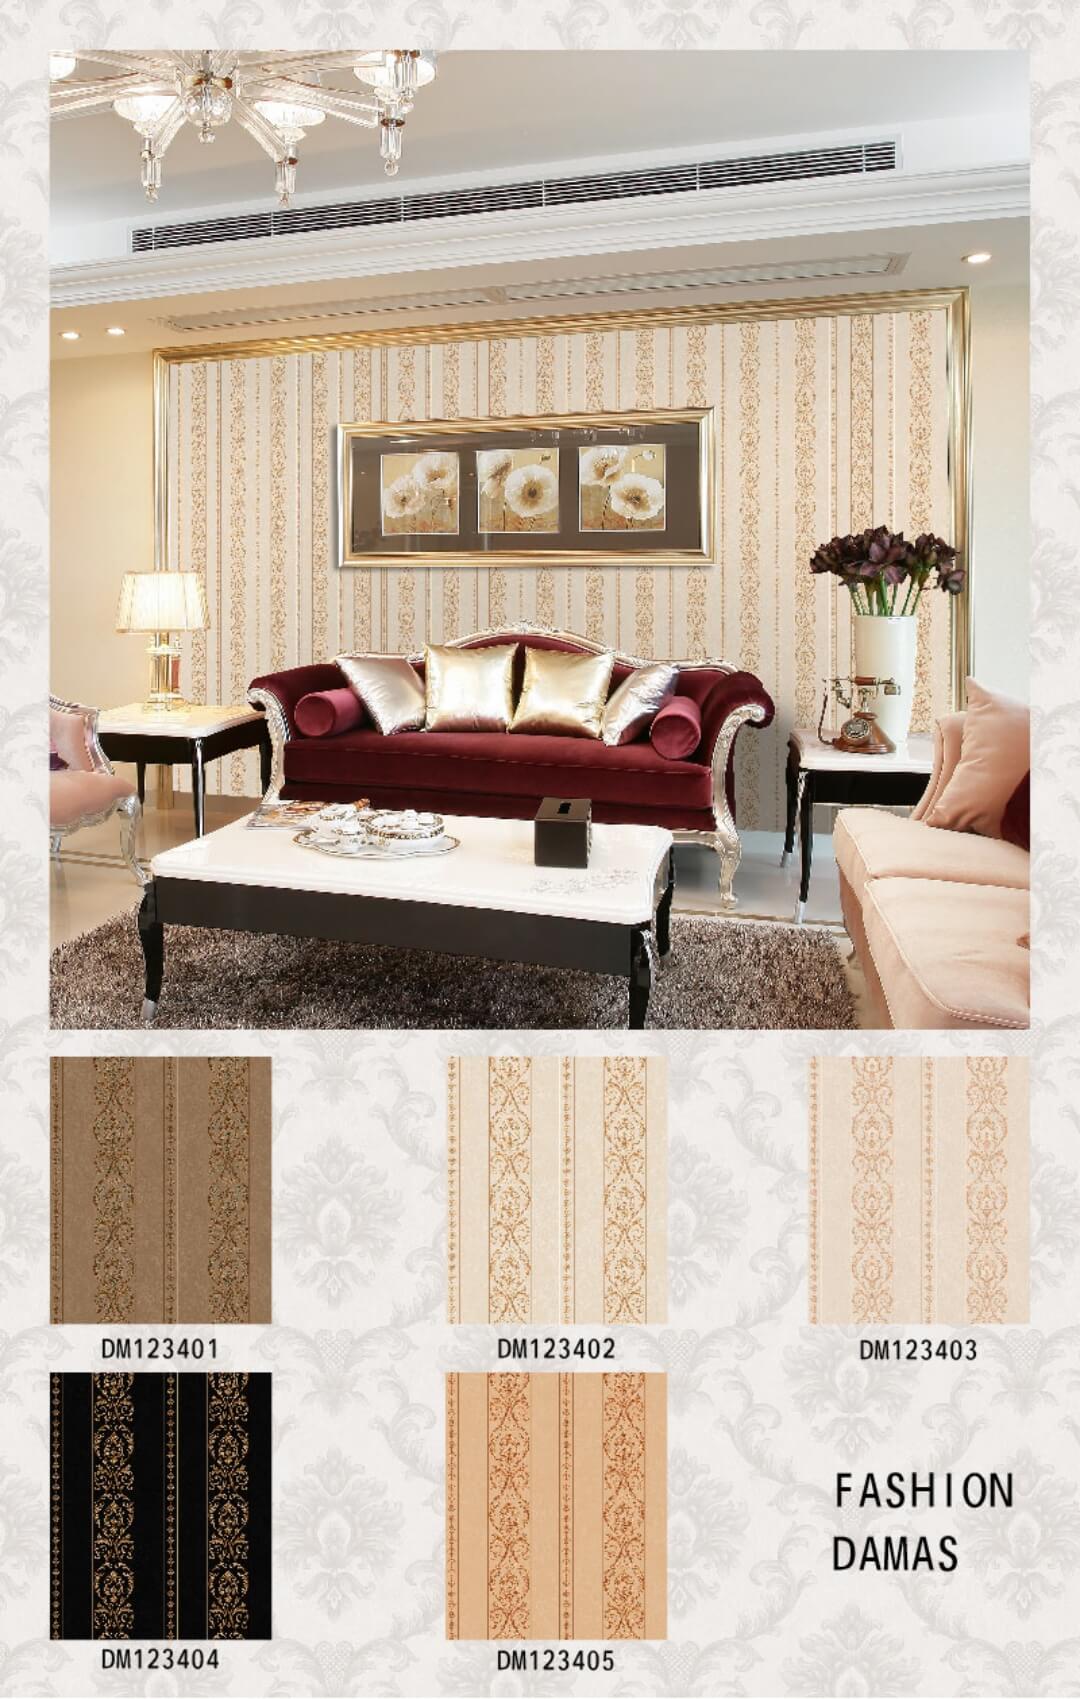 Classic Damask Pvc Wallpaper From China Wholesale (12)